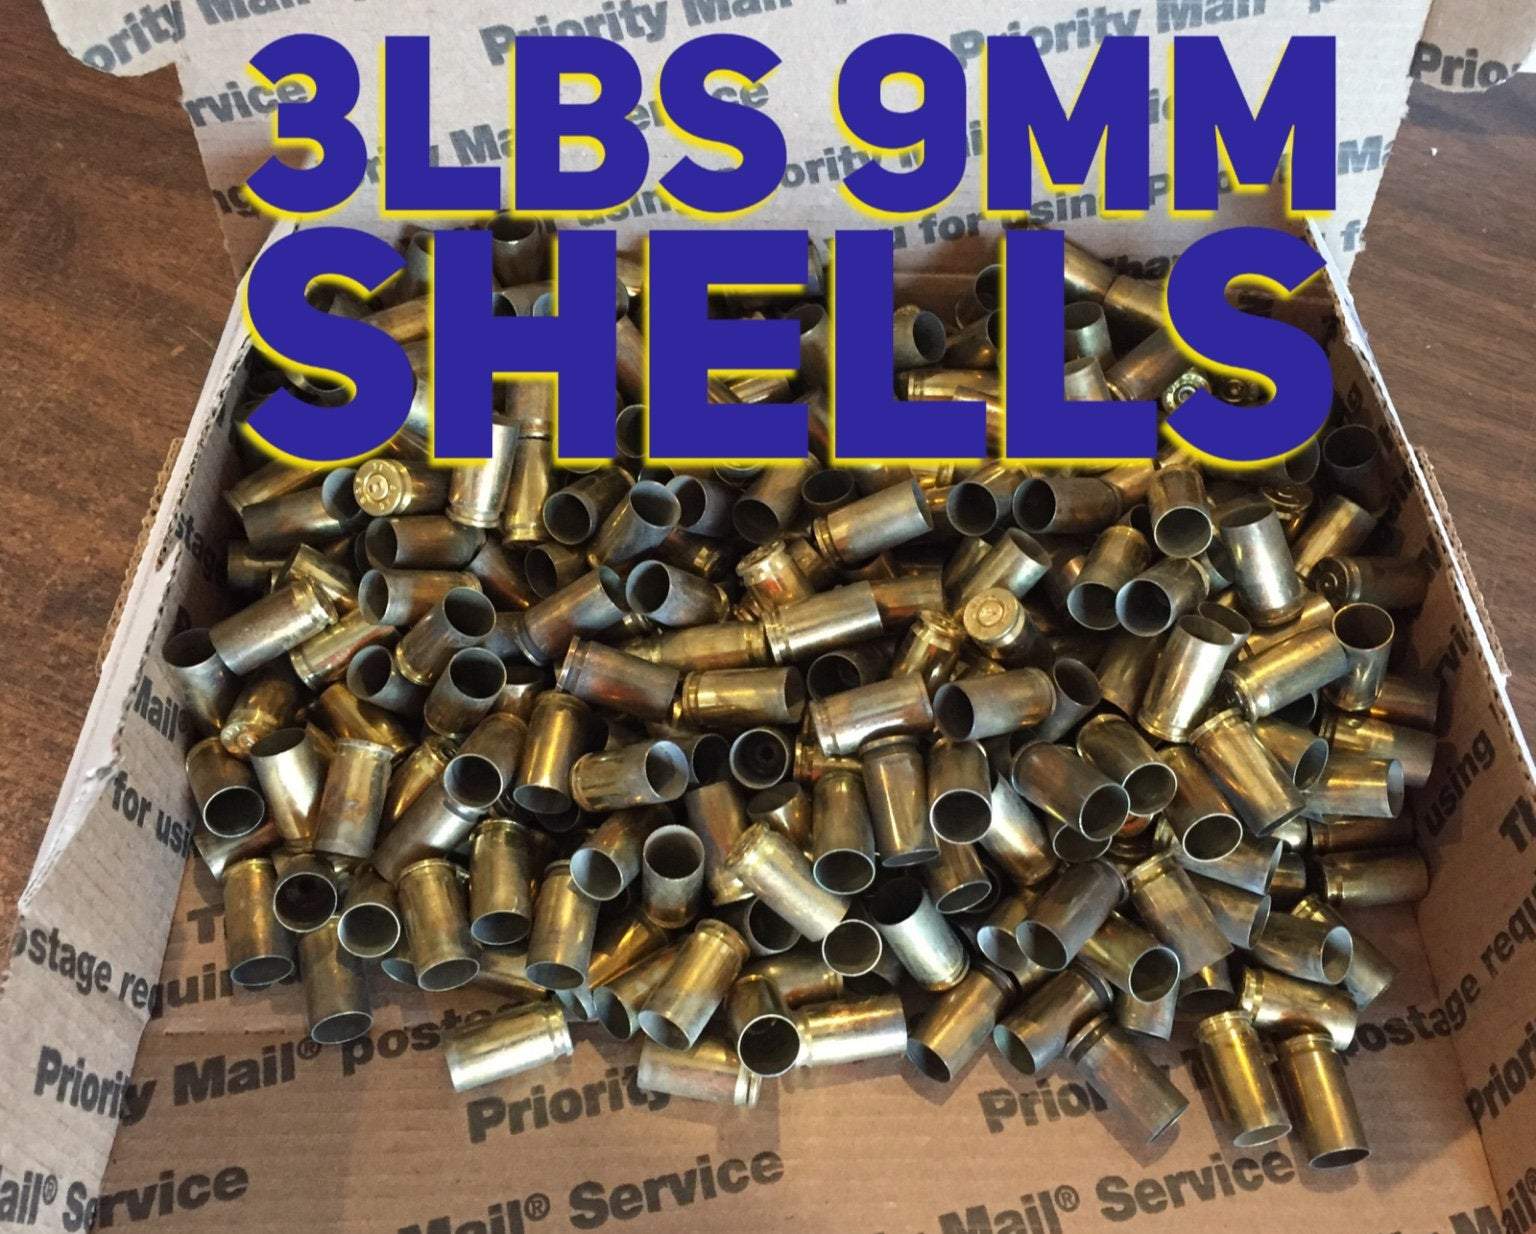 Empty Brass Shells 9MM Used Bullet Casings 9X19 Luger Cleaned